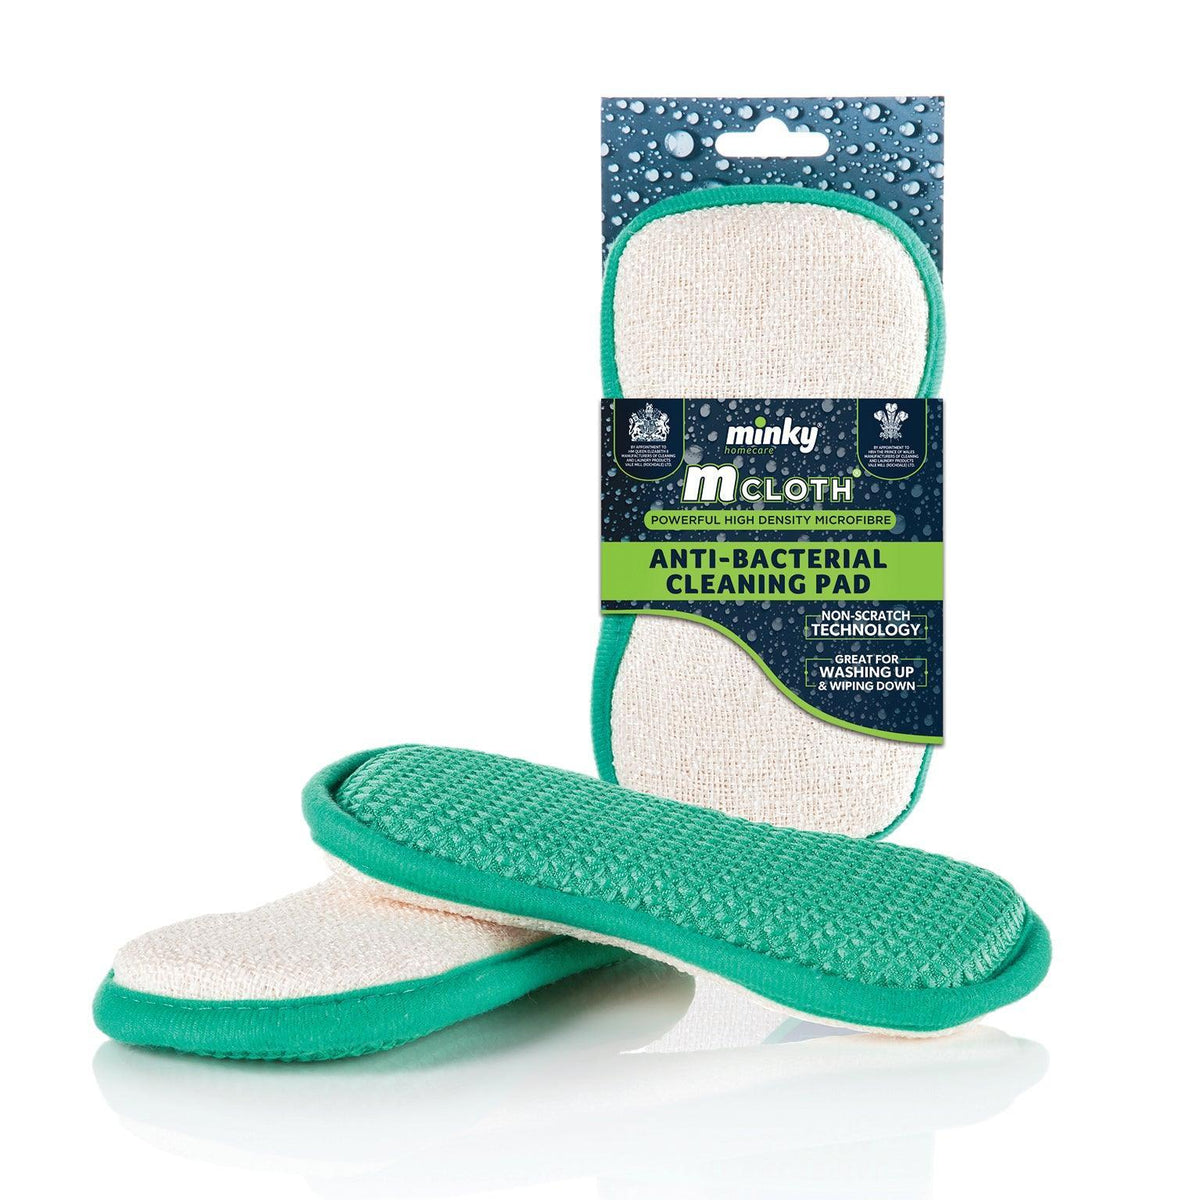 https://www.choicestores.ie/cdn/shop/files/minky-m-cloth-non-scratch-anti-bacterial-cleaning-pad-choice-stores_4514490e-91bb-4428-88af-4c5cbfdf3462_1200x.jpg?v=1687424134